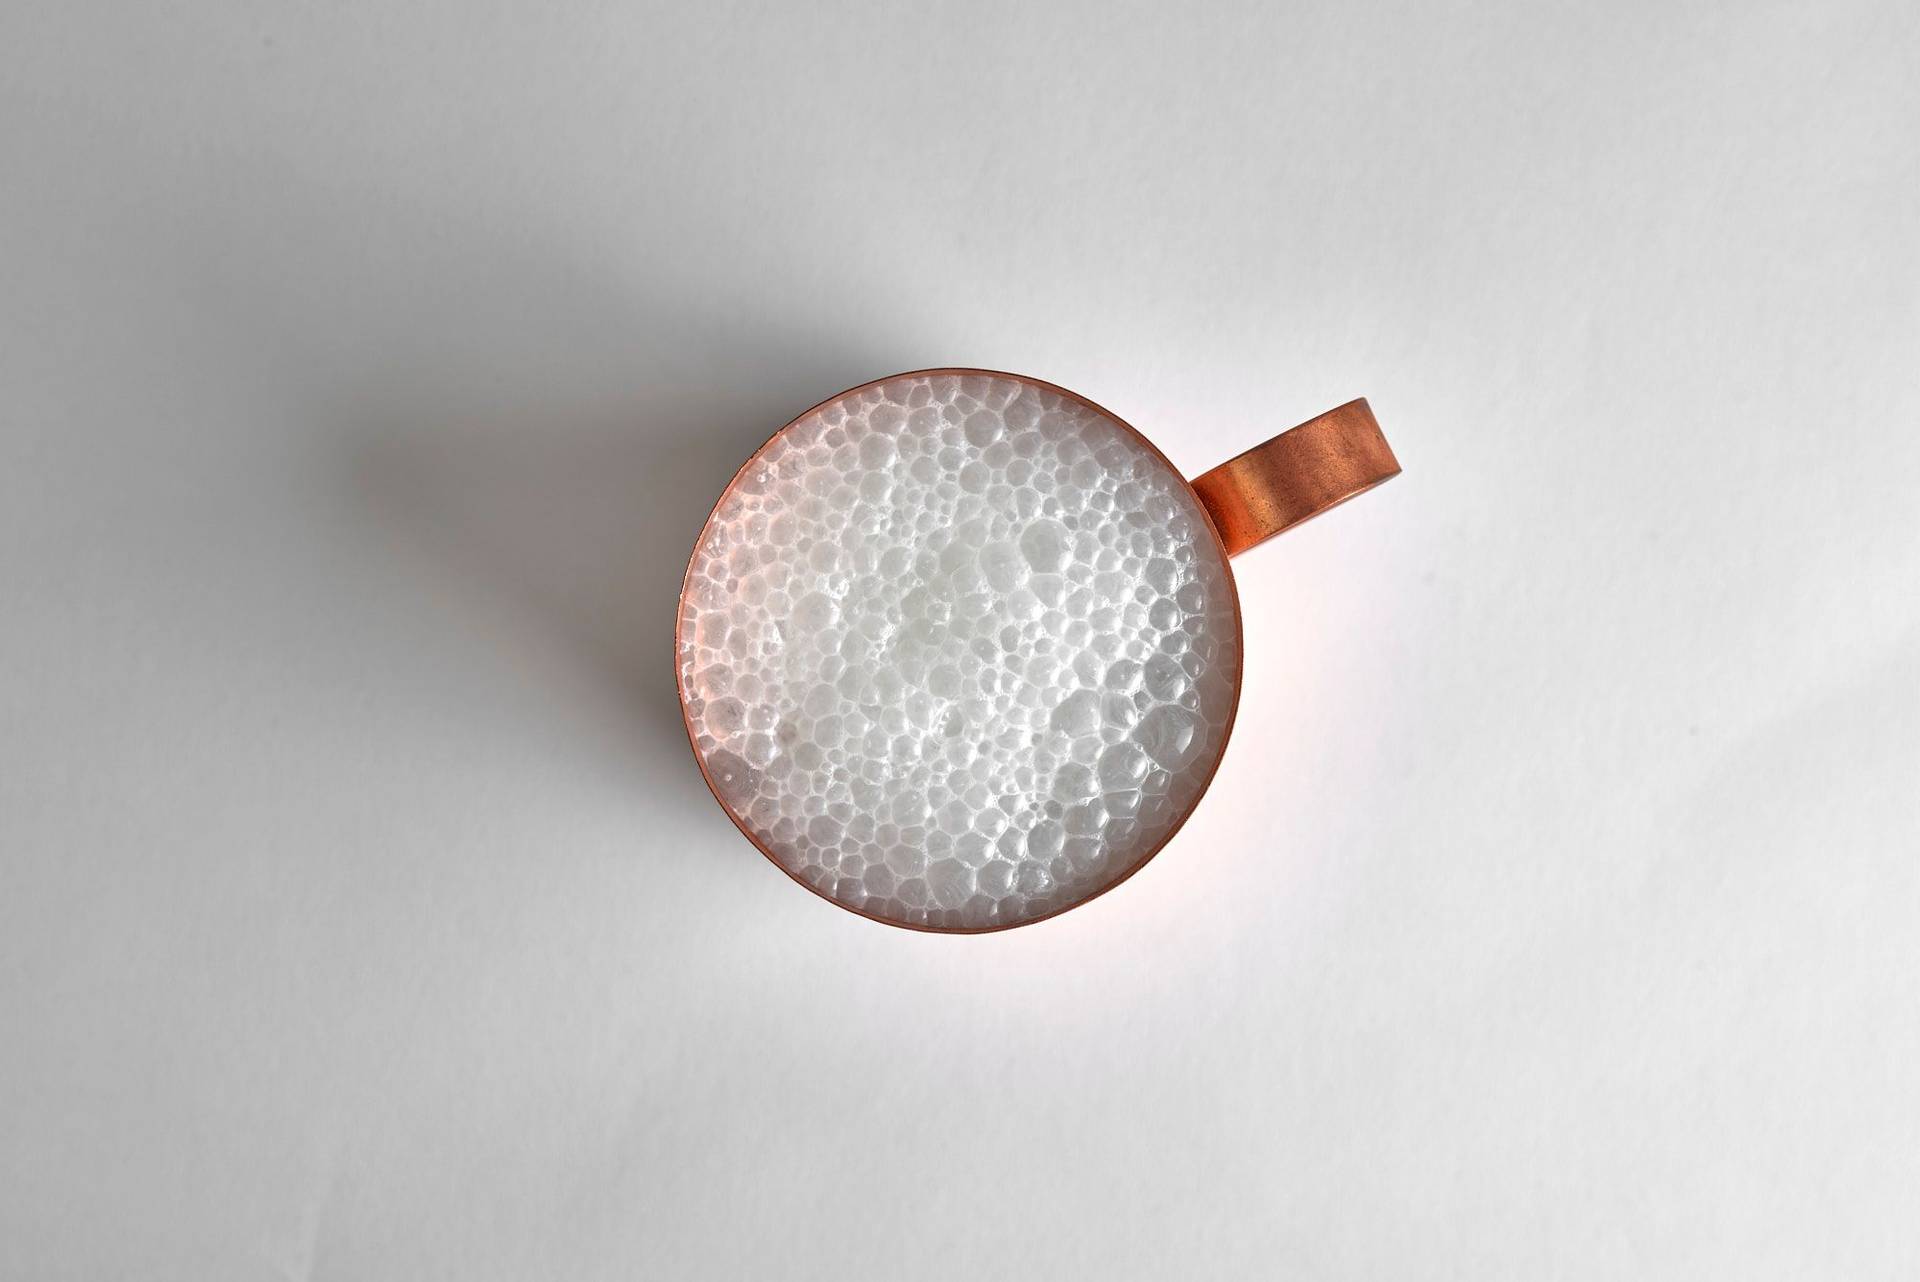 foamy ayran in a copper cup with white background